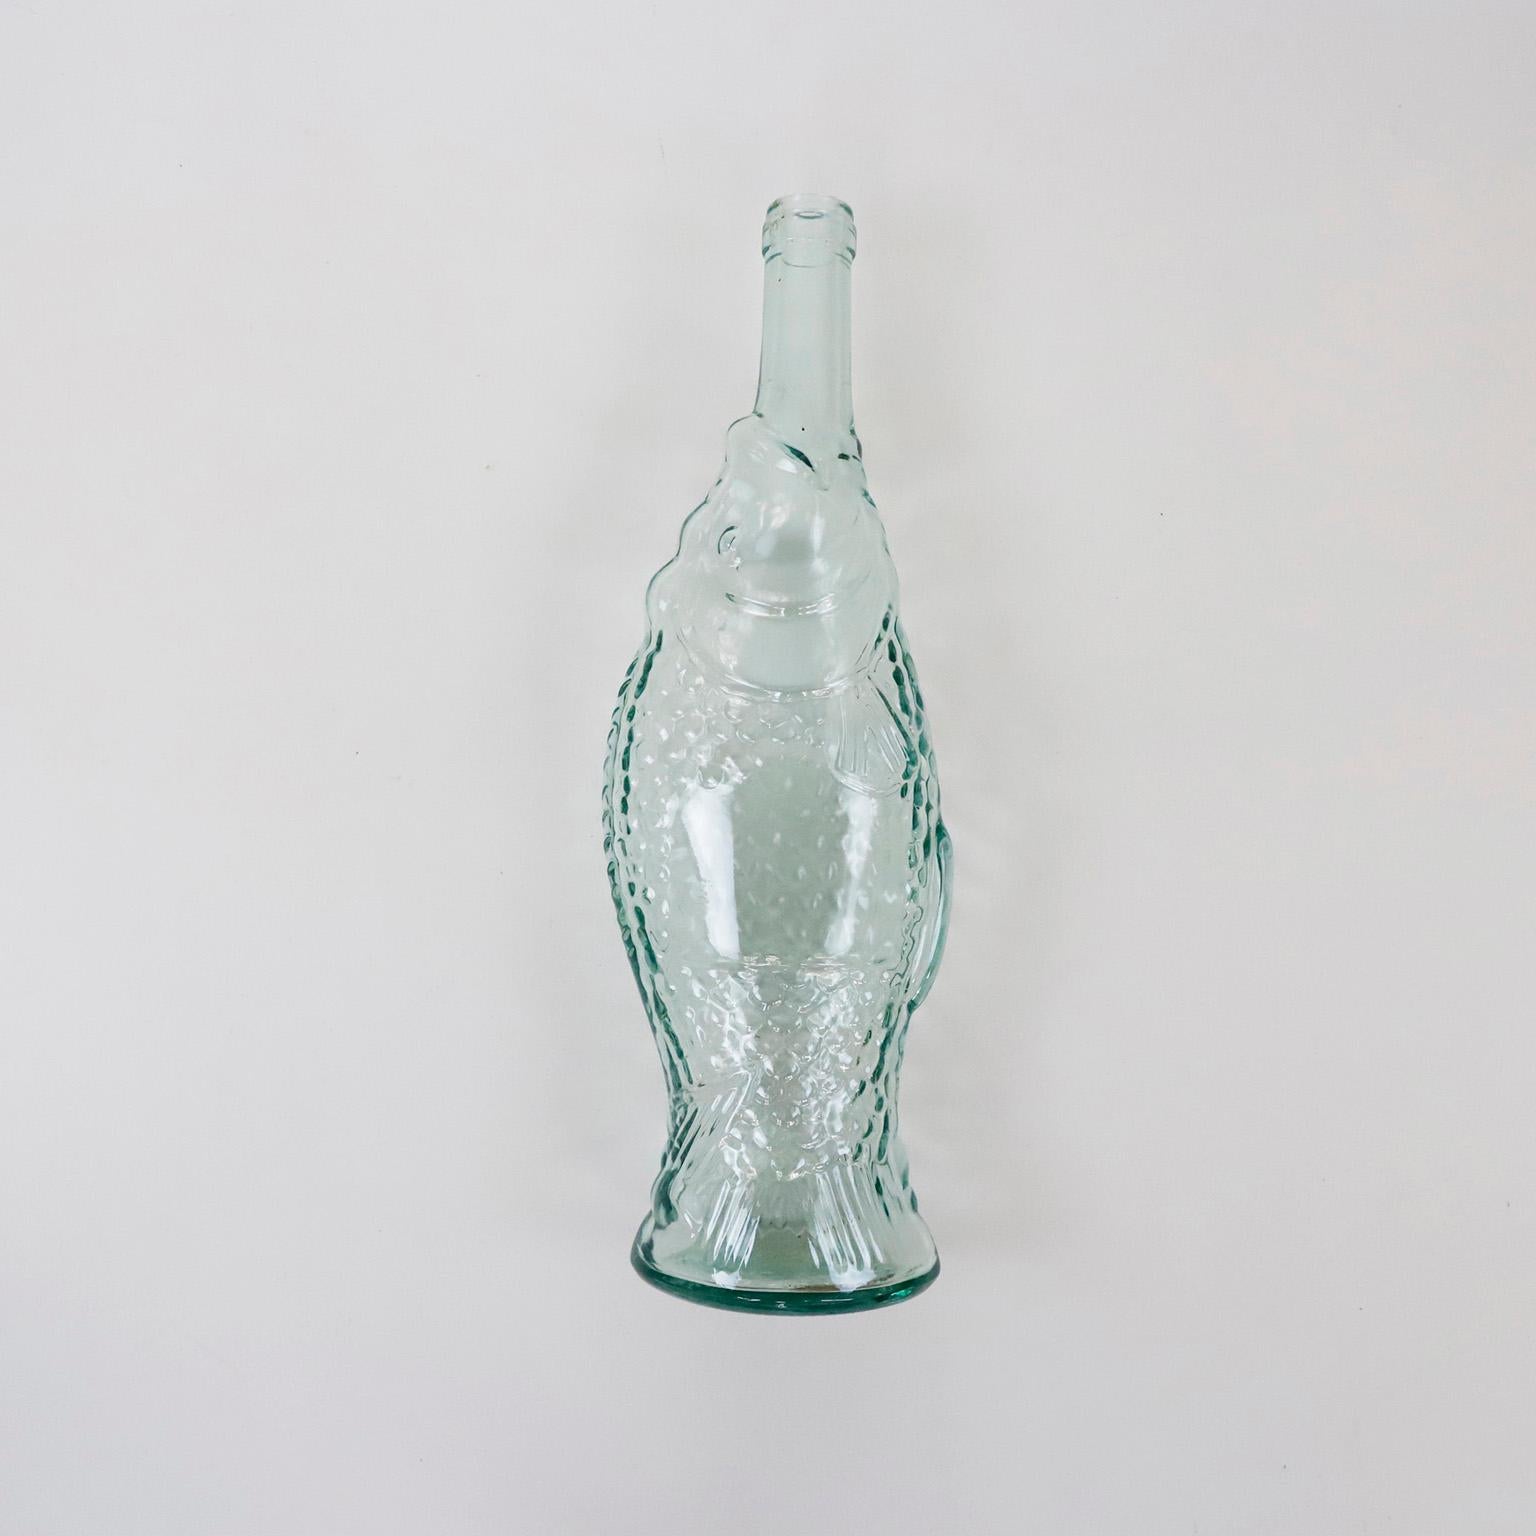 circa 1970. We offer this pair of glass bottles in fish shape.